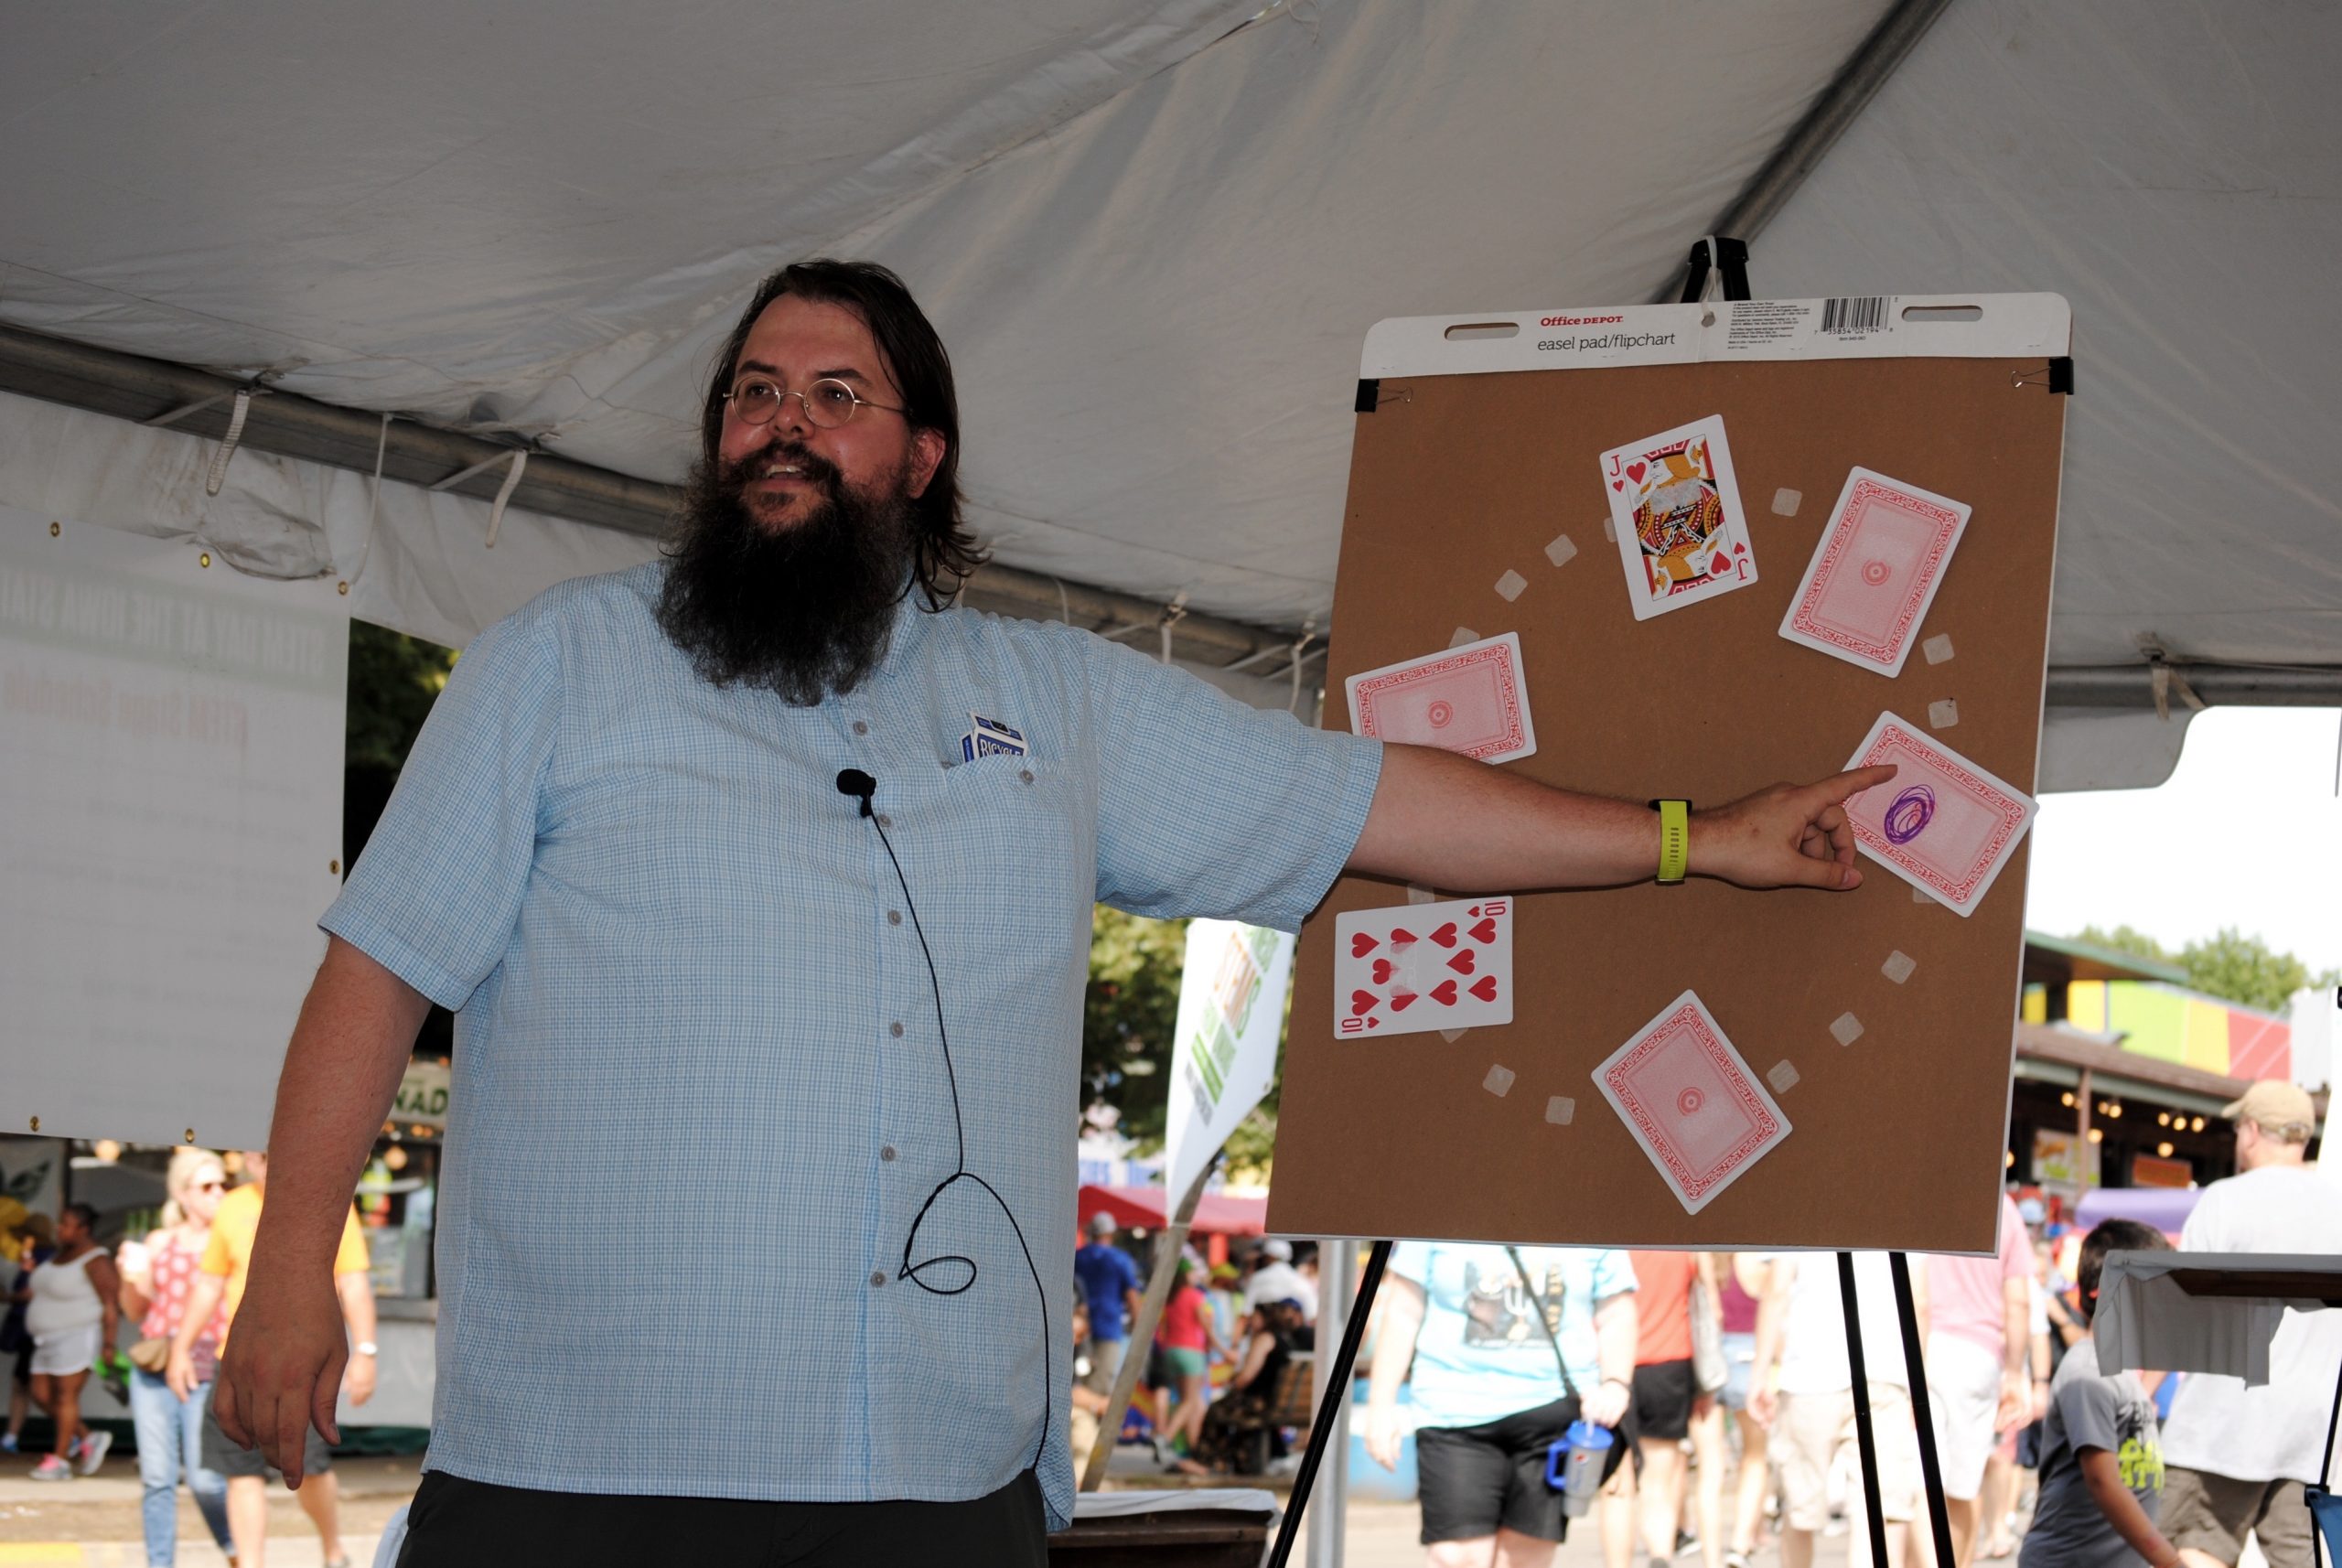 Steve Butler points to large cards on a cardboard display in a tent at the State Fair.